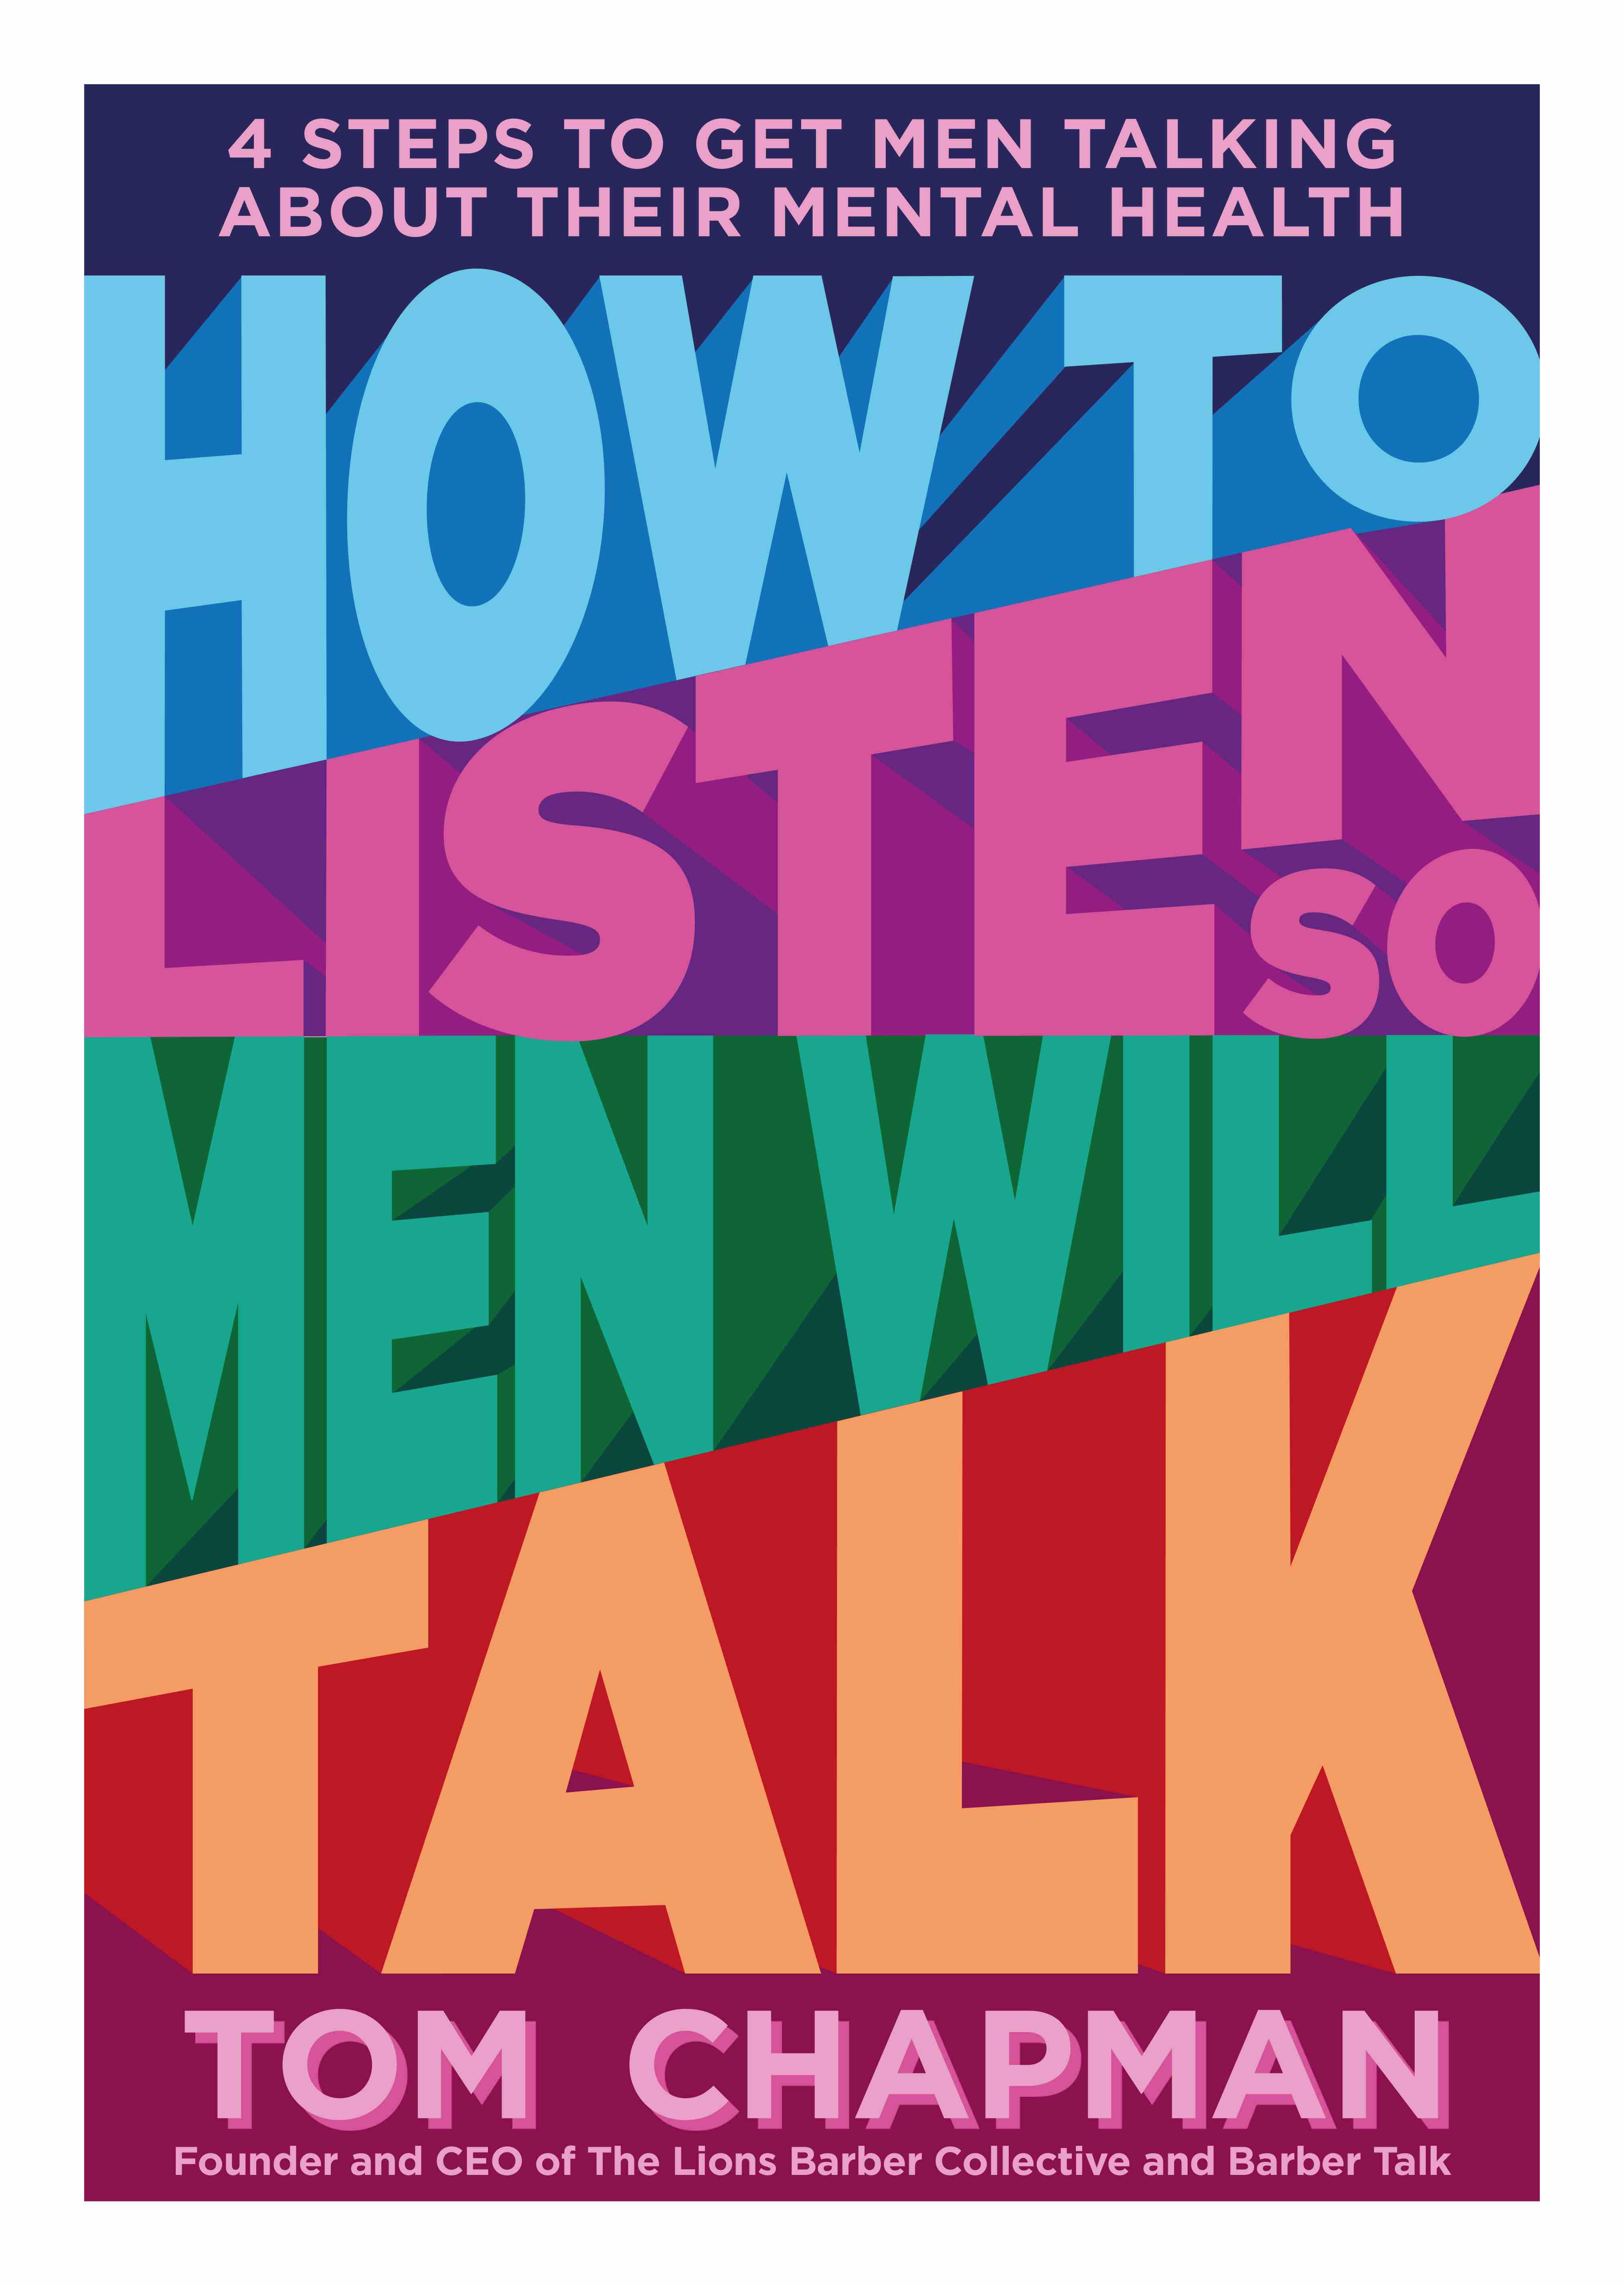 How to talk so men will listen book cover